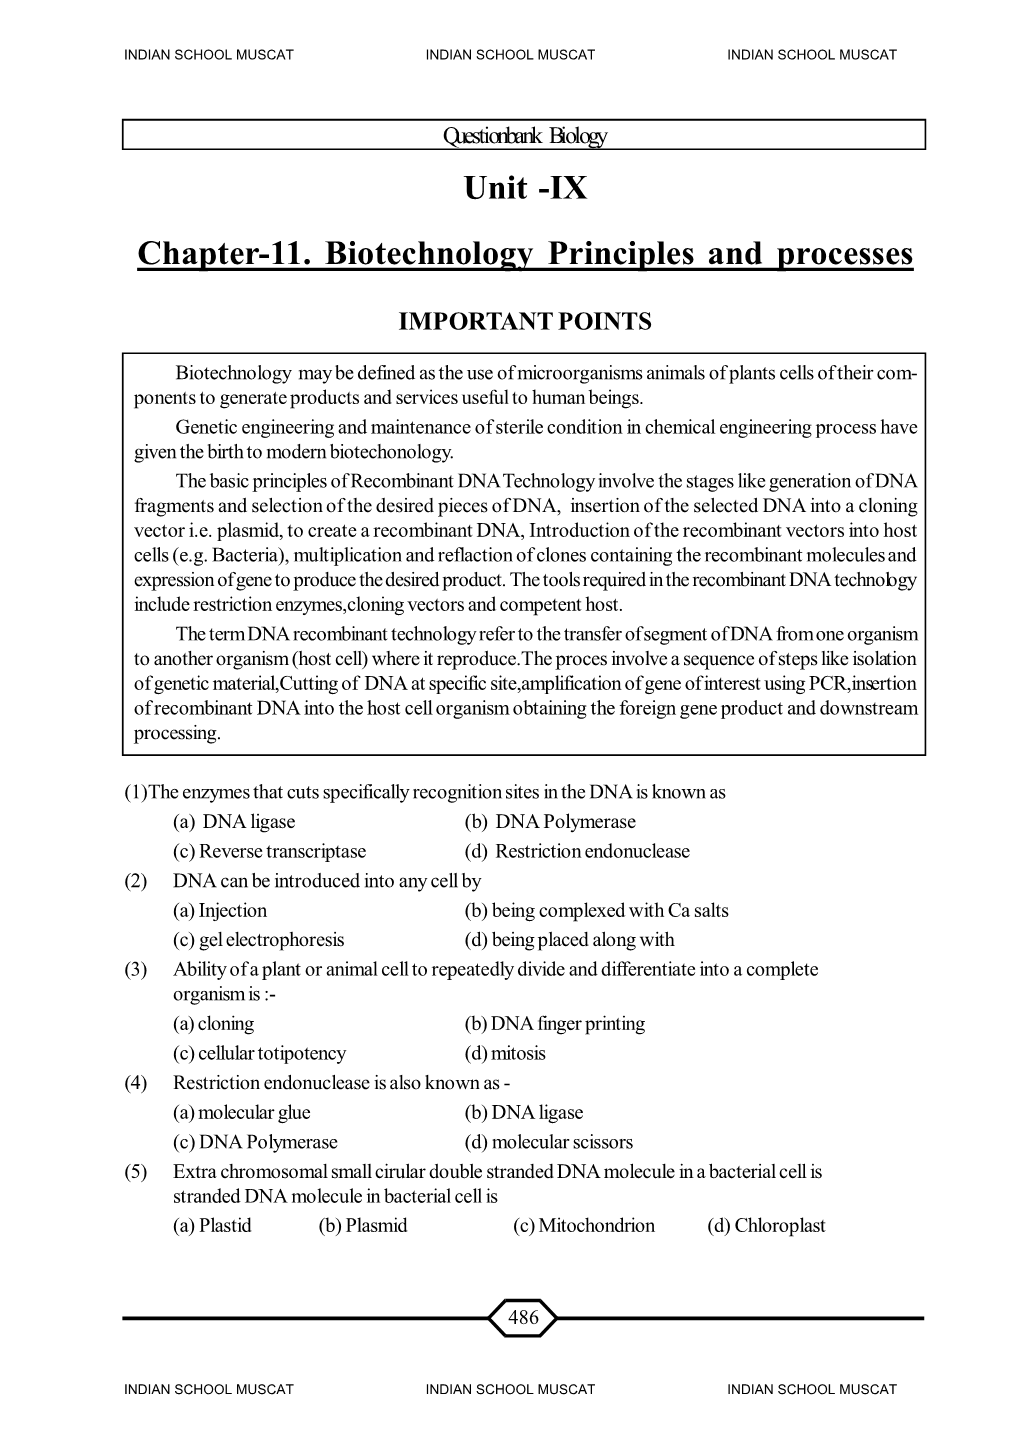 Unit -IX Chapter-11. Biotechnology Principles and Processes